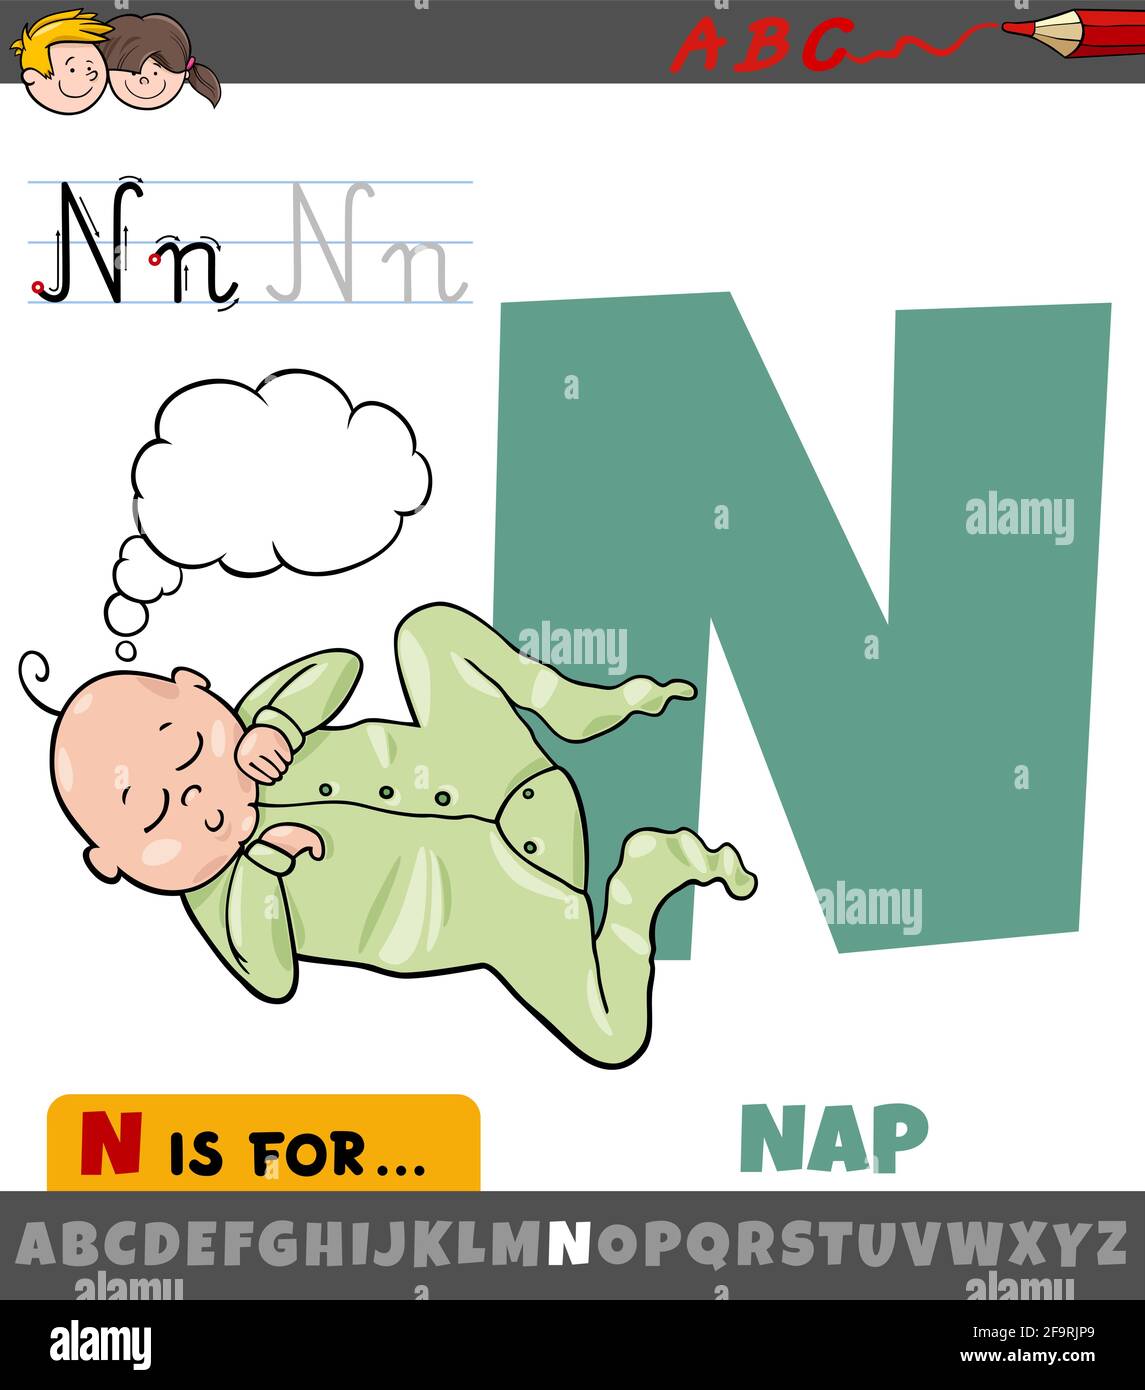 Educational cartoon illustration of letter N from alphabet with nap word Stock Vector